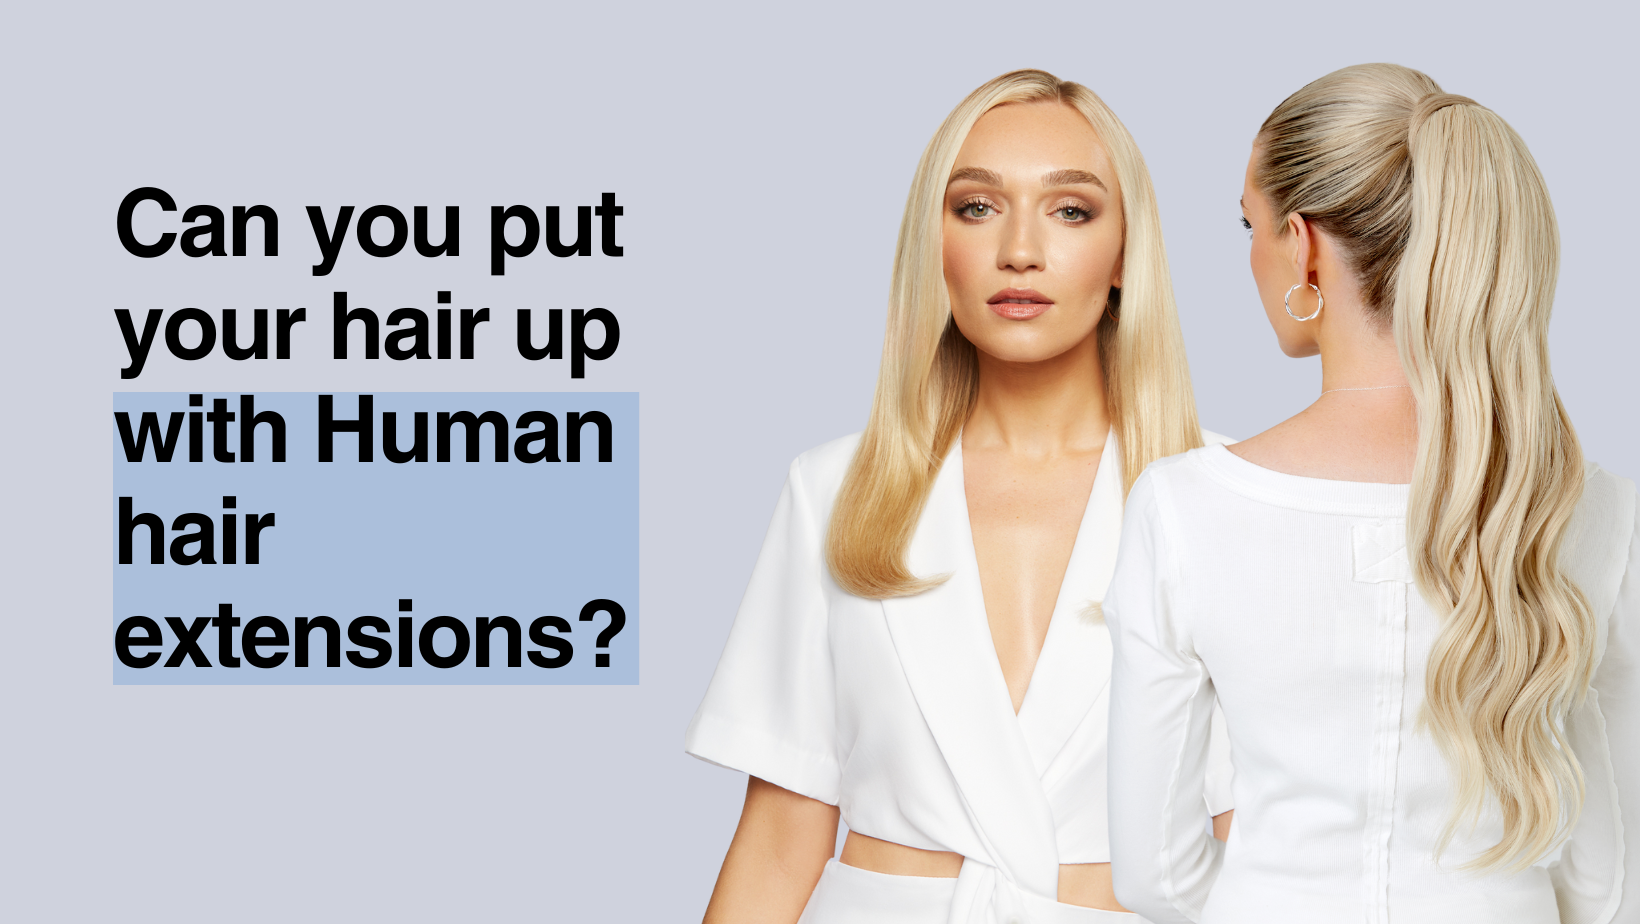 Can you put your hair up with Human hair extensions?